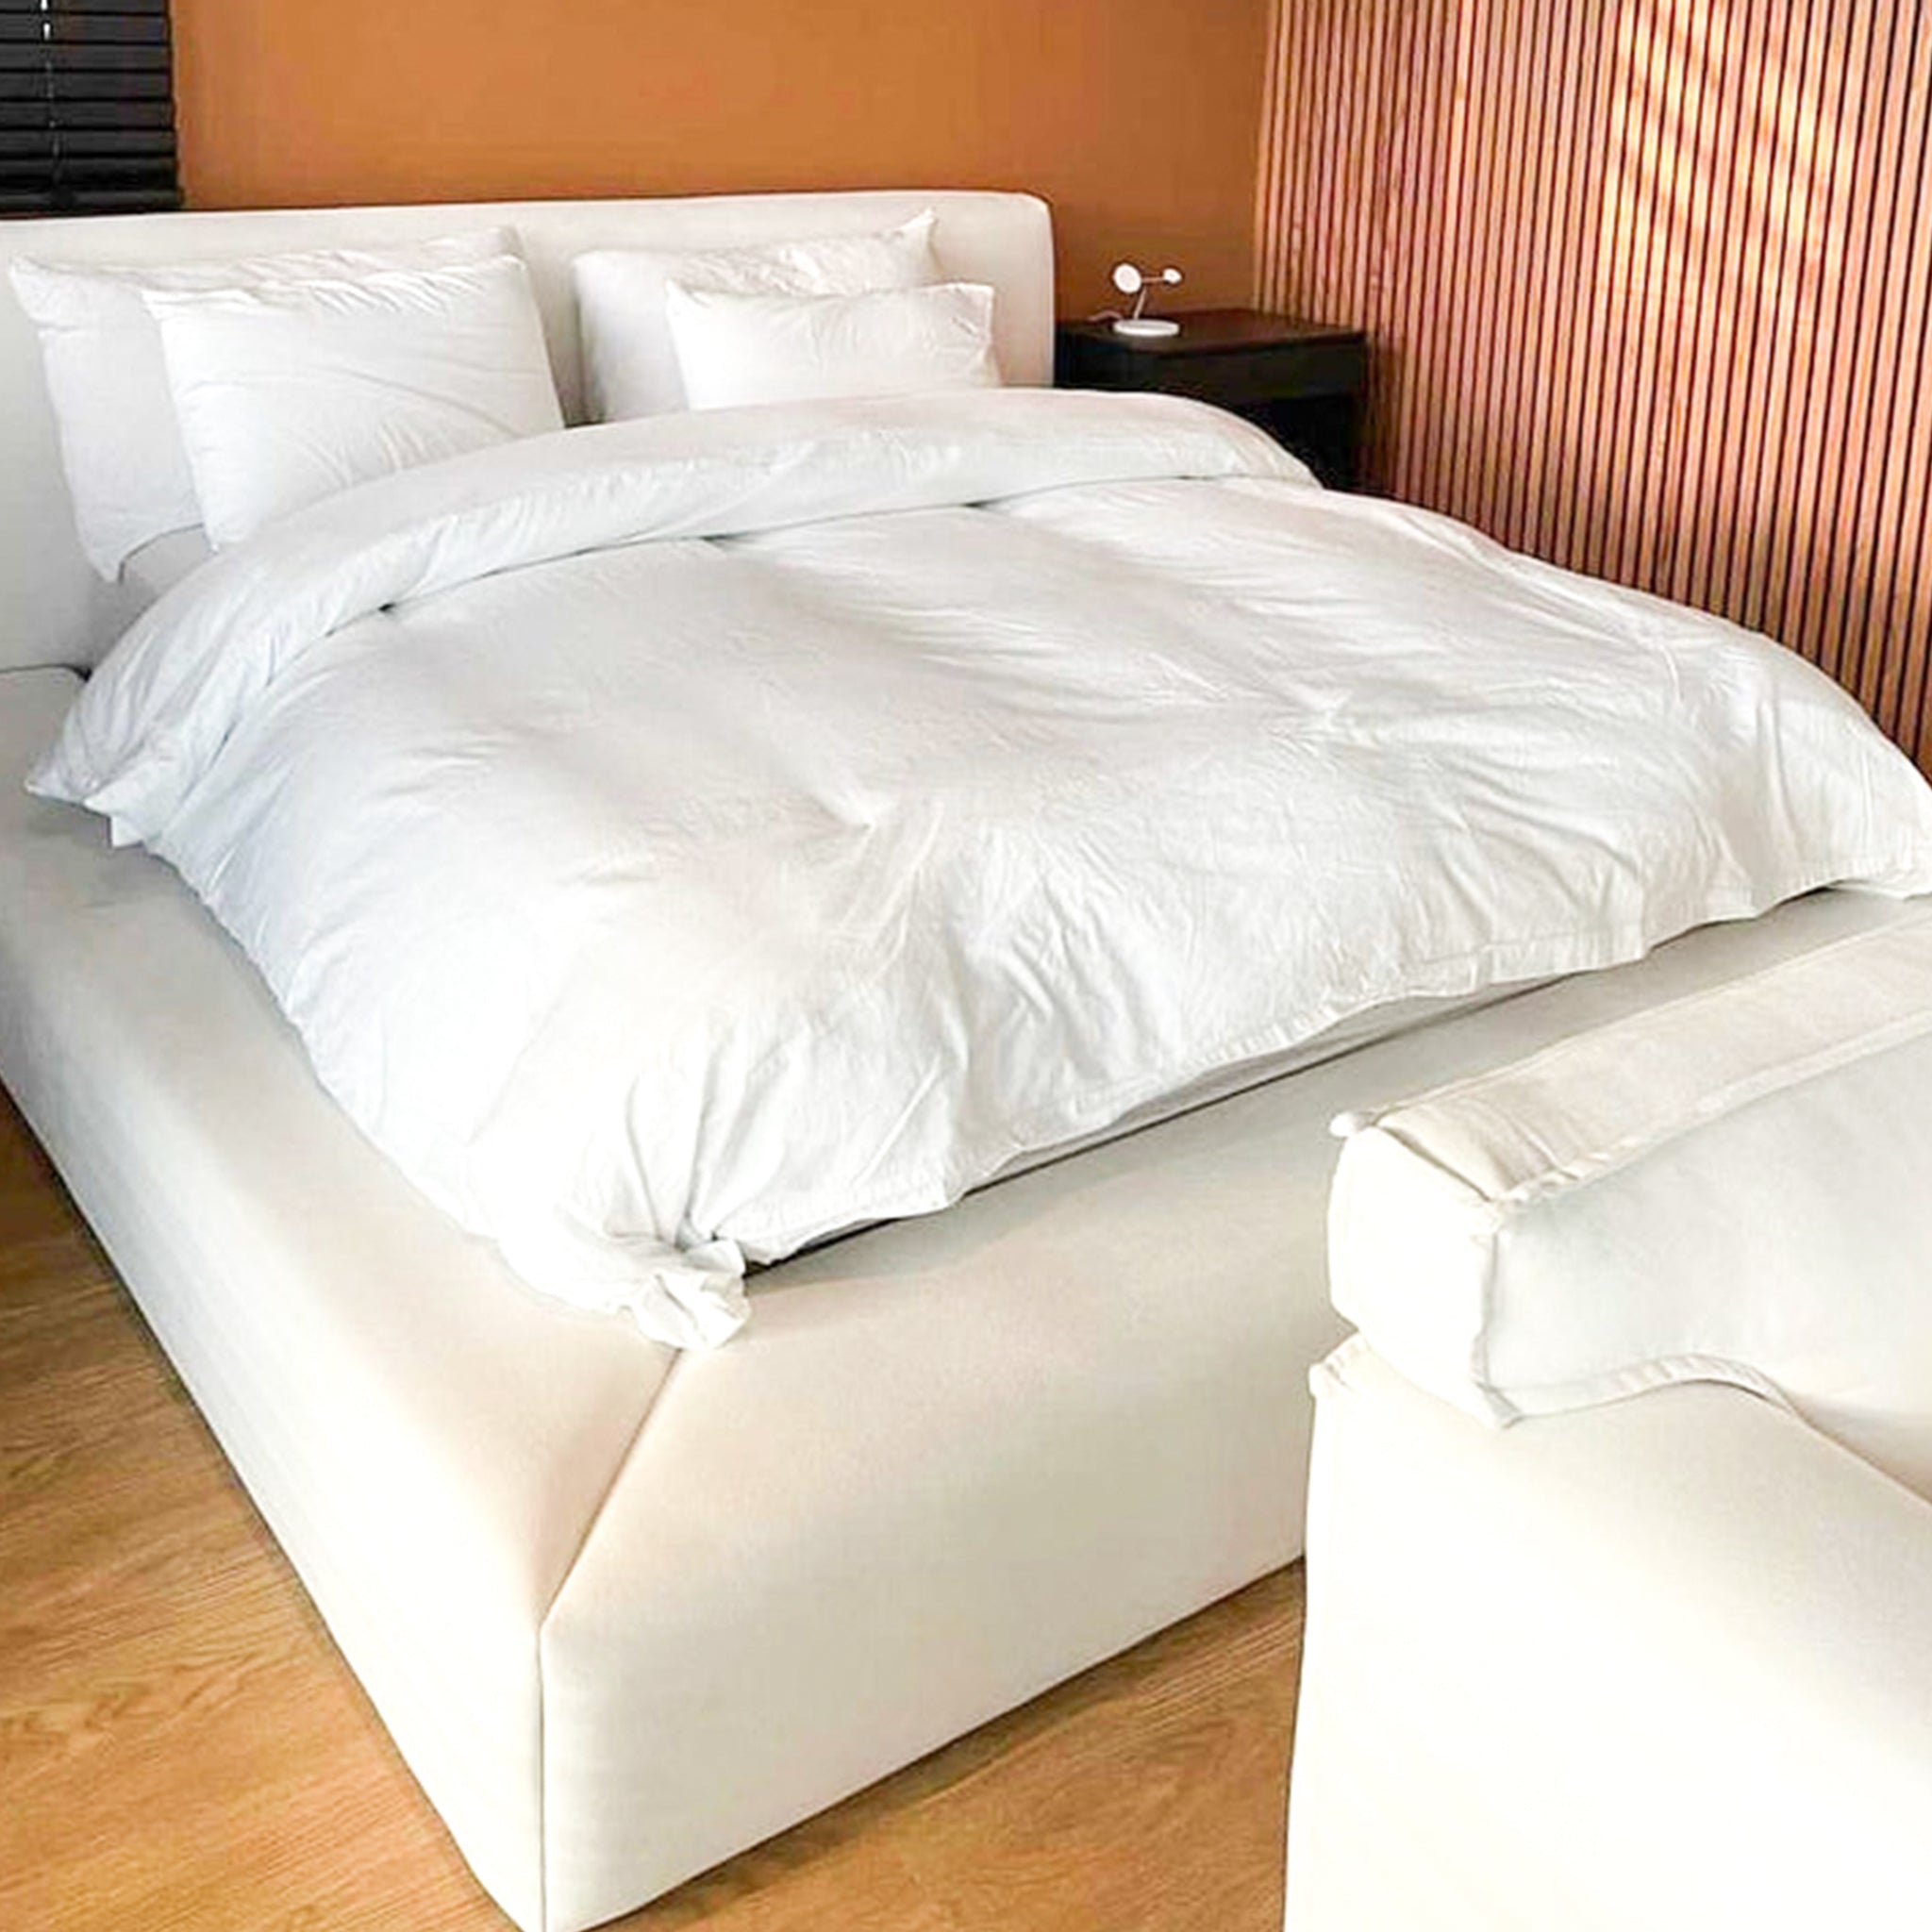 Minimalist Stella Bed in stain-resistant fabric. Easy care platform bed for a peaceful retreat.